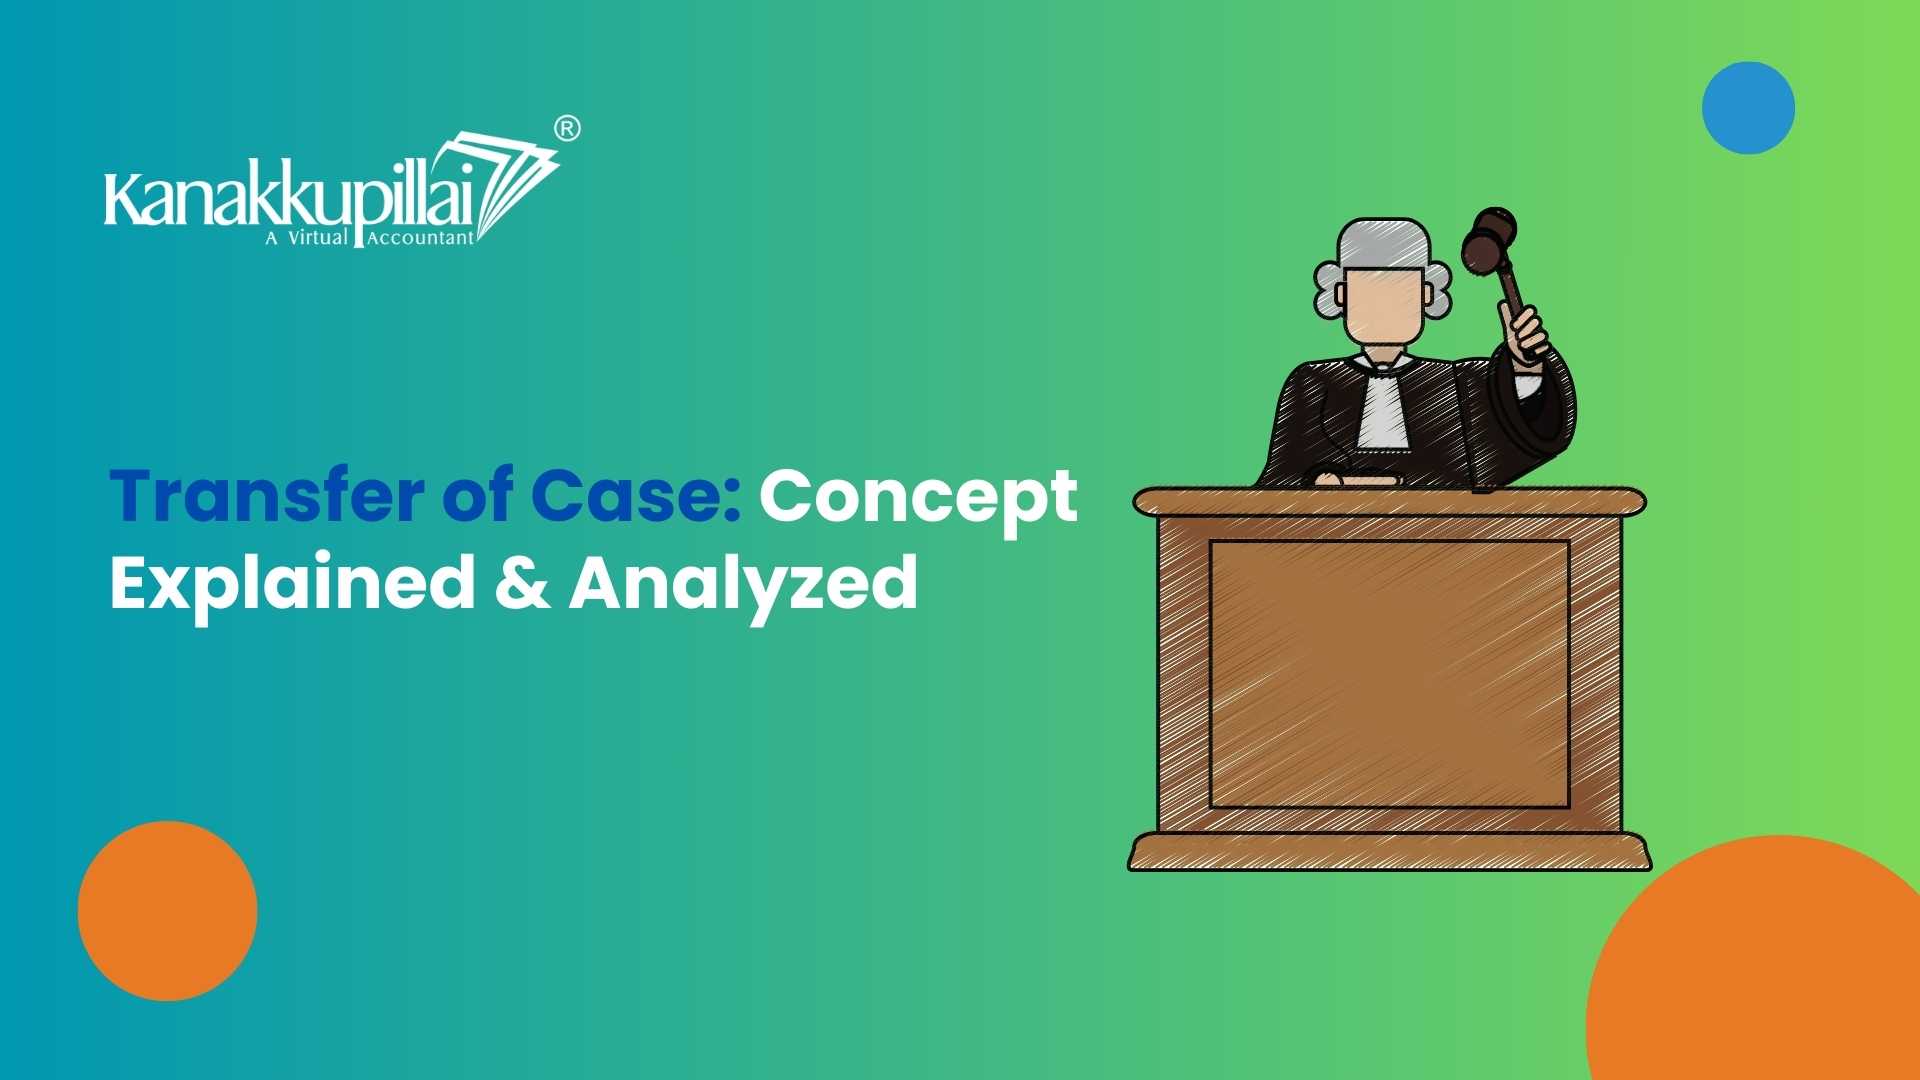 You are currently viewing The Concept of Transfer of Case: Explained and Analyzed